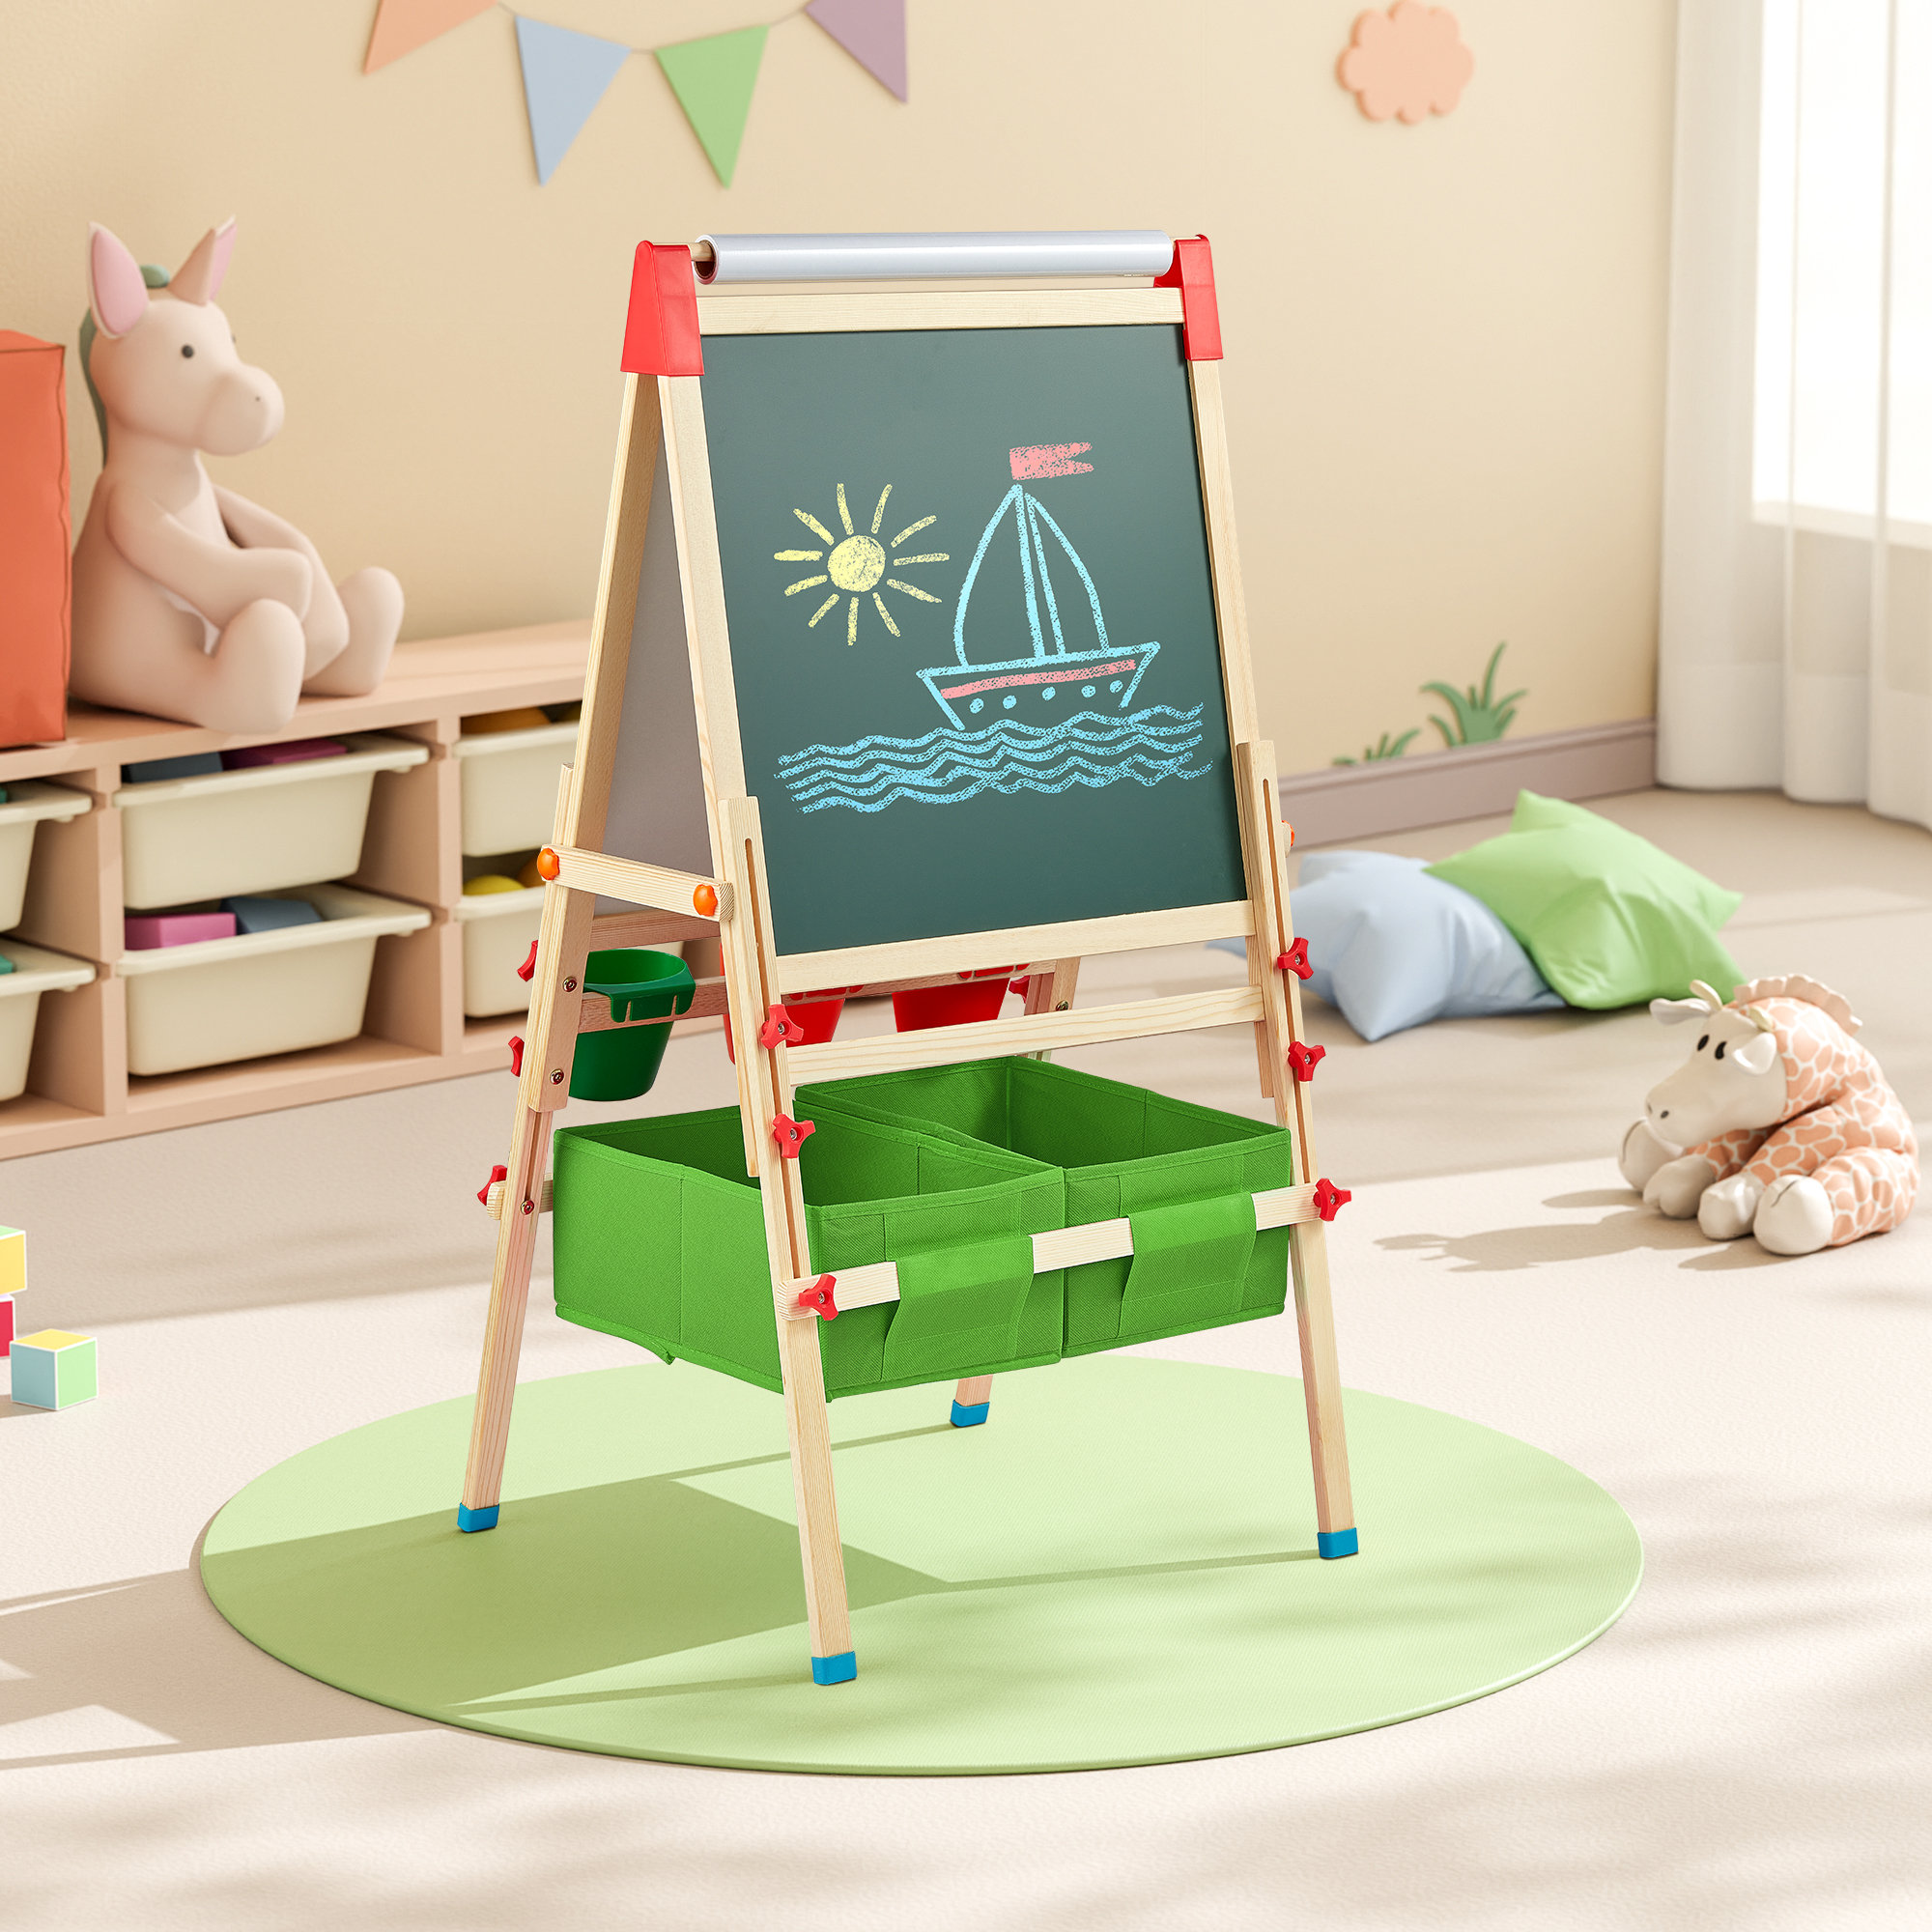 Wooden Easel for Kids 3 in 1 Kids Easel with Paper Roll Adjustable Height  Art Easel Chalkboard & Whiteboard Drawing Easel for Kids Toddlers.